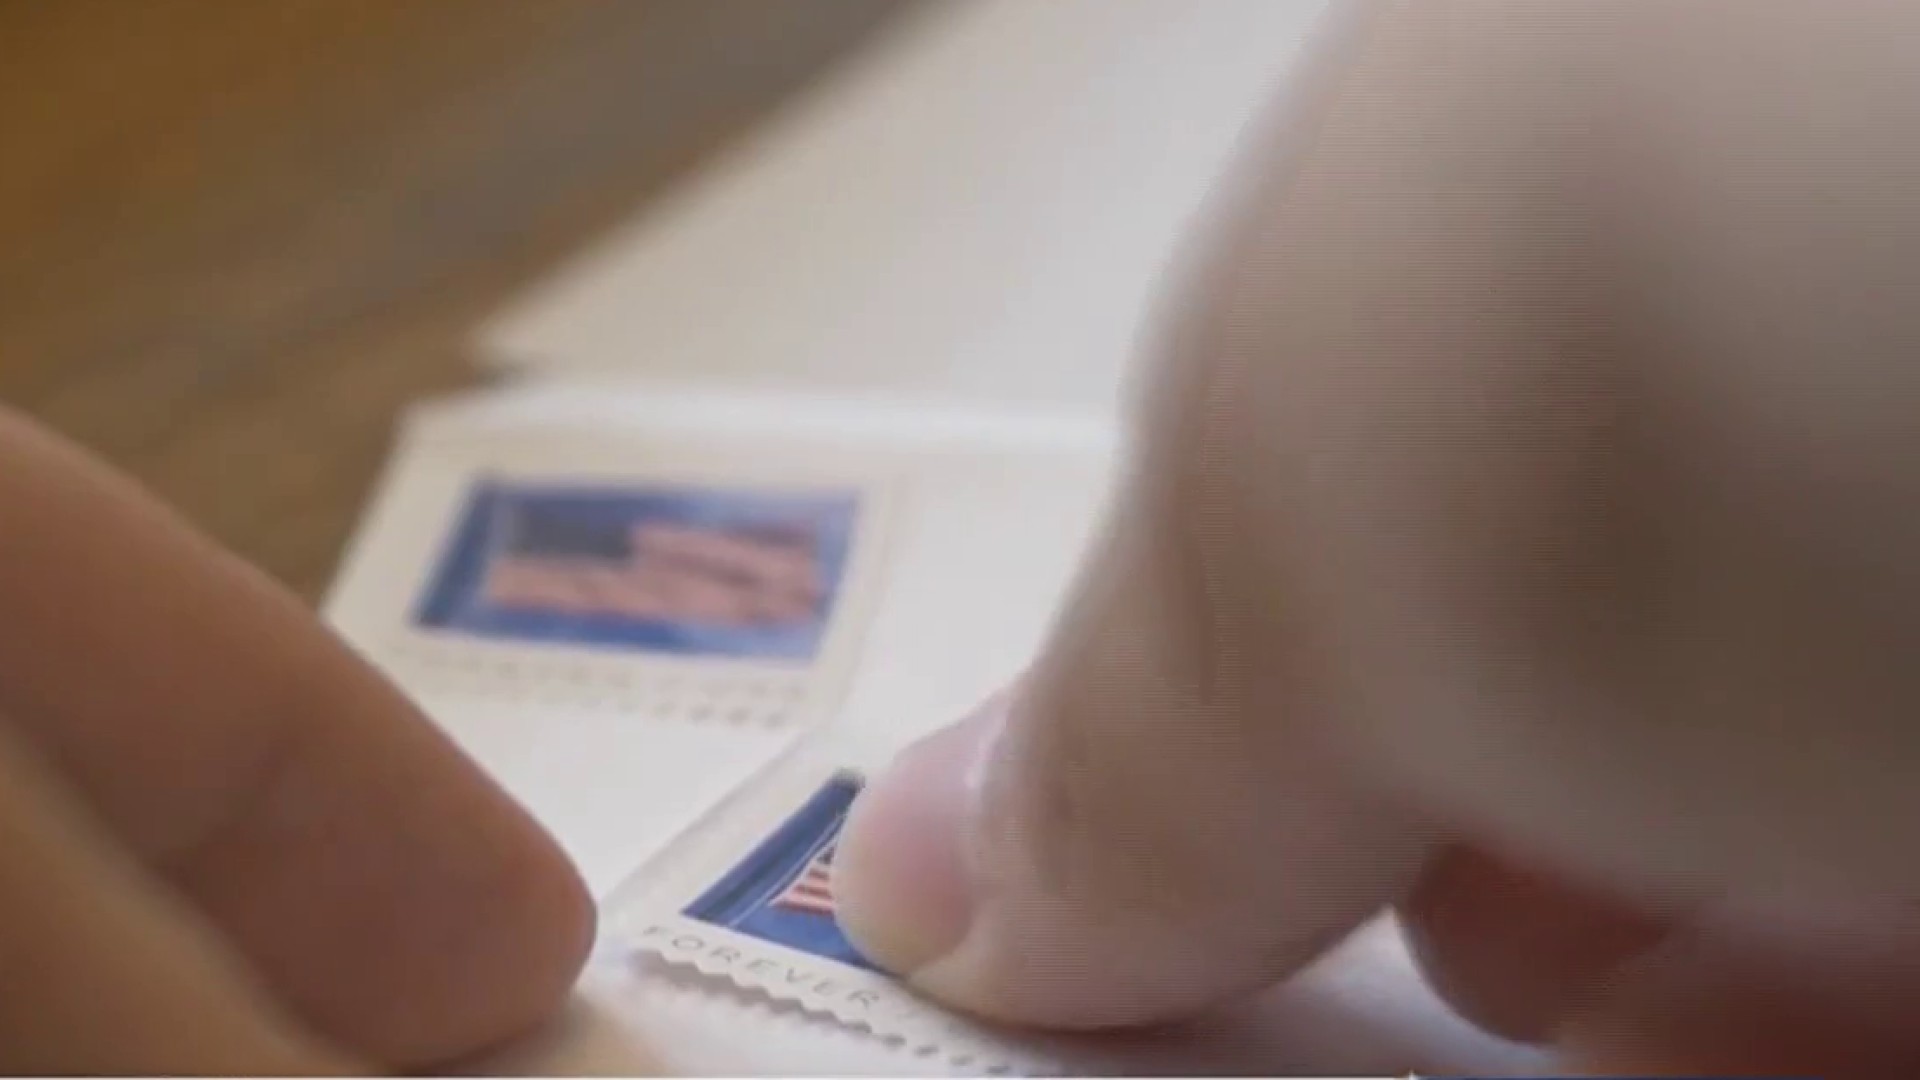 Stamping Out Counterfeit Postage